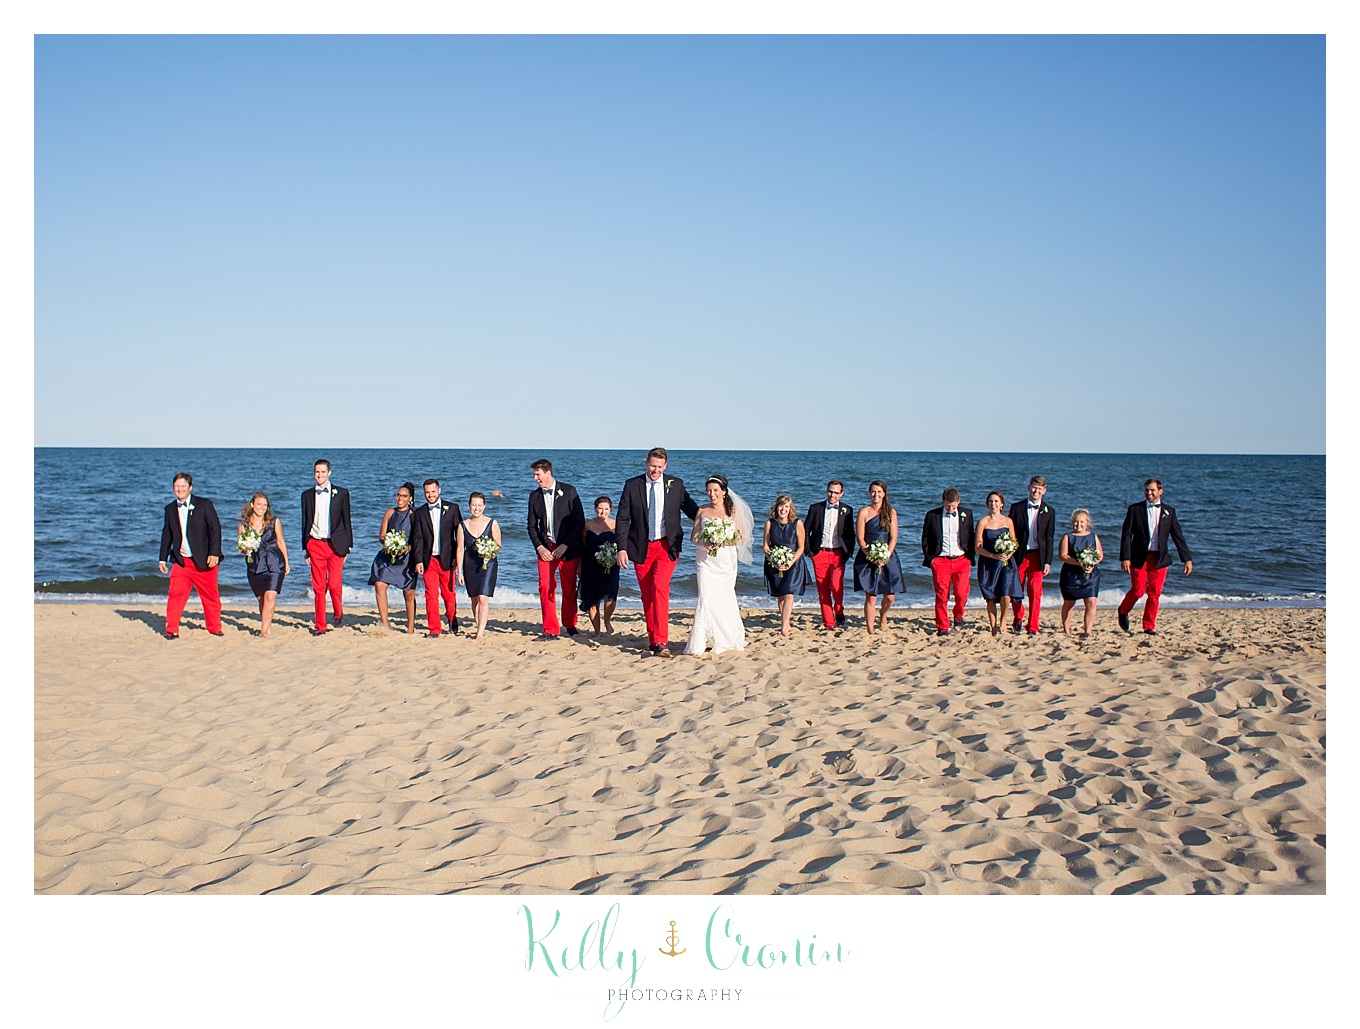 A wedding party stands in a line along the shoreline.